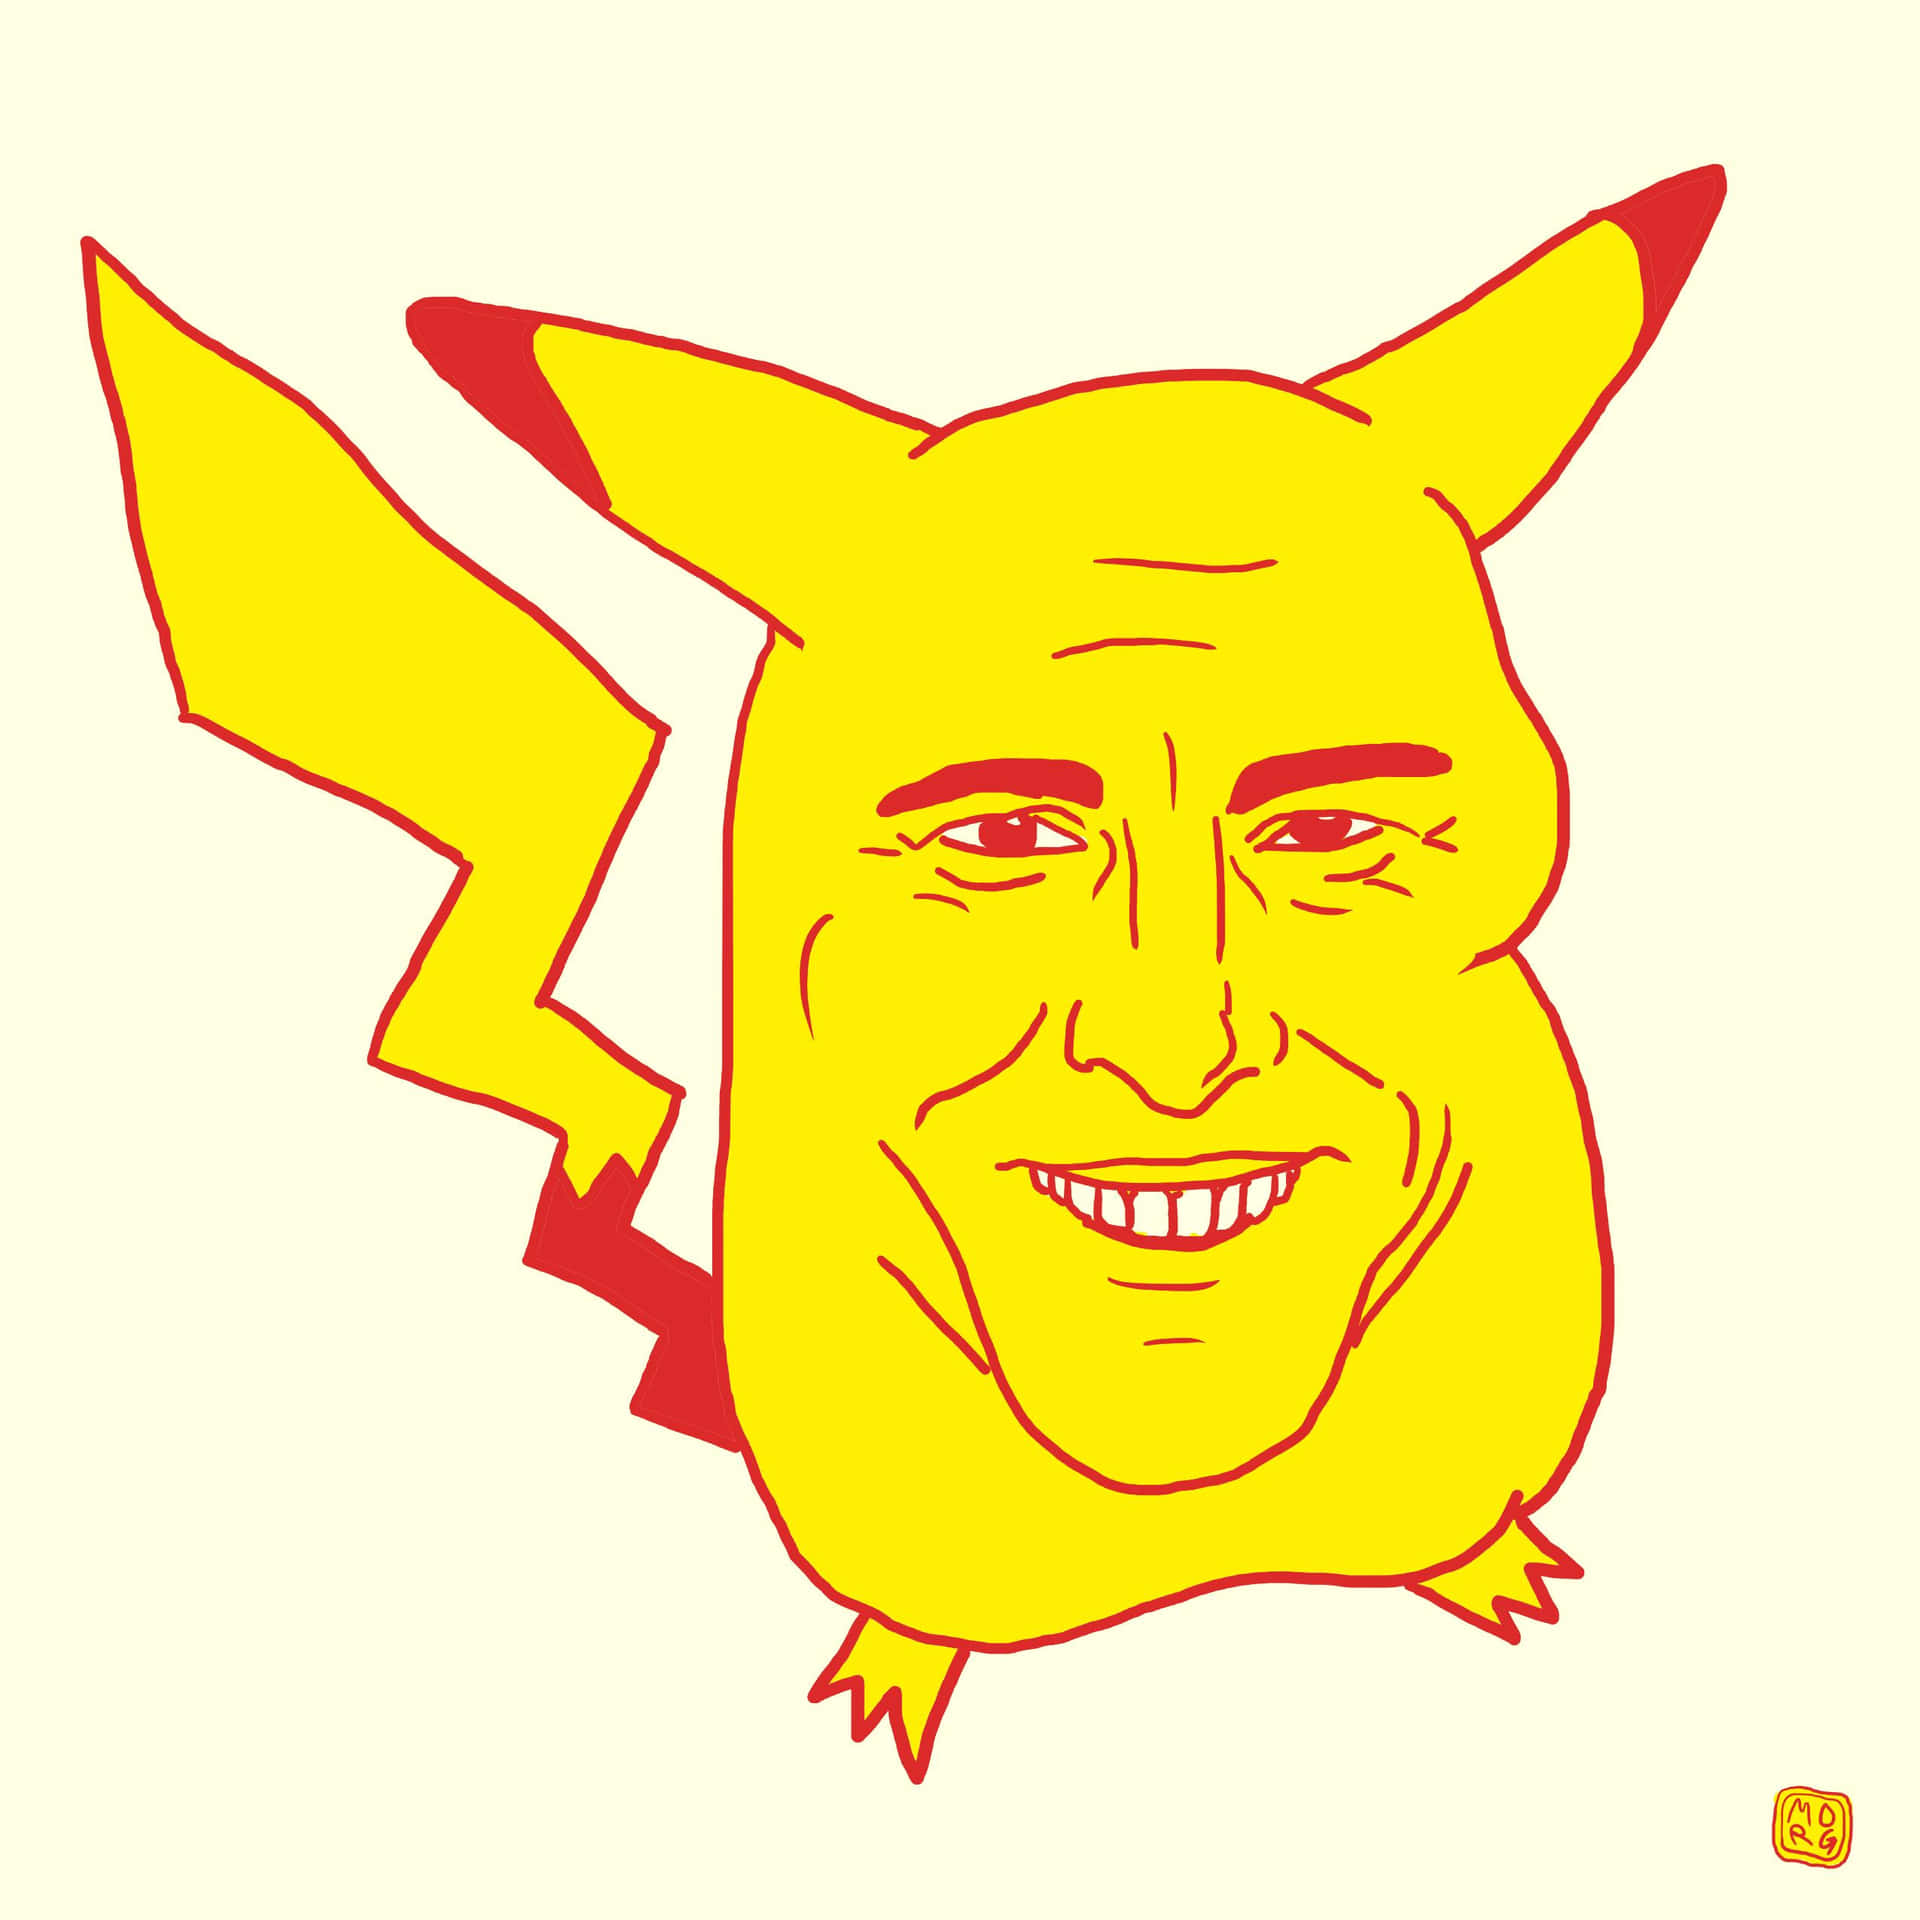 A Drawing Of A Pikachu With A Smile